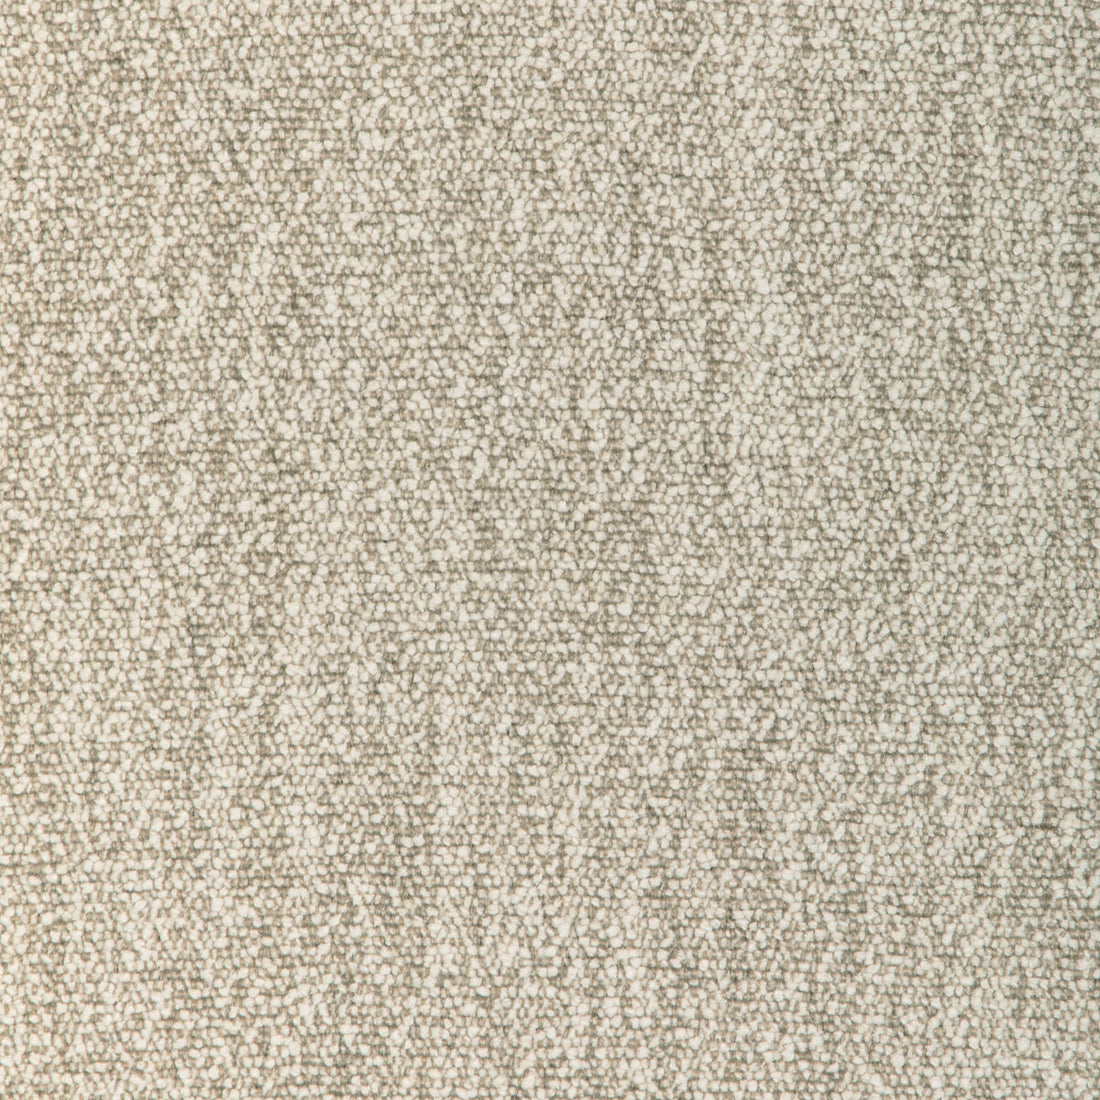 Nubby Linen fabric in flax color - pattern 36911.16.0 - by Kravet Couture in the Atelier Weaves collection